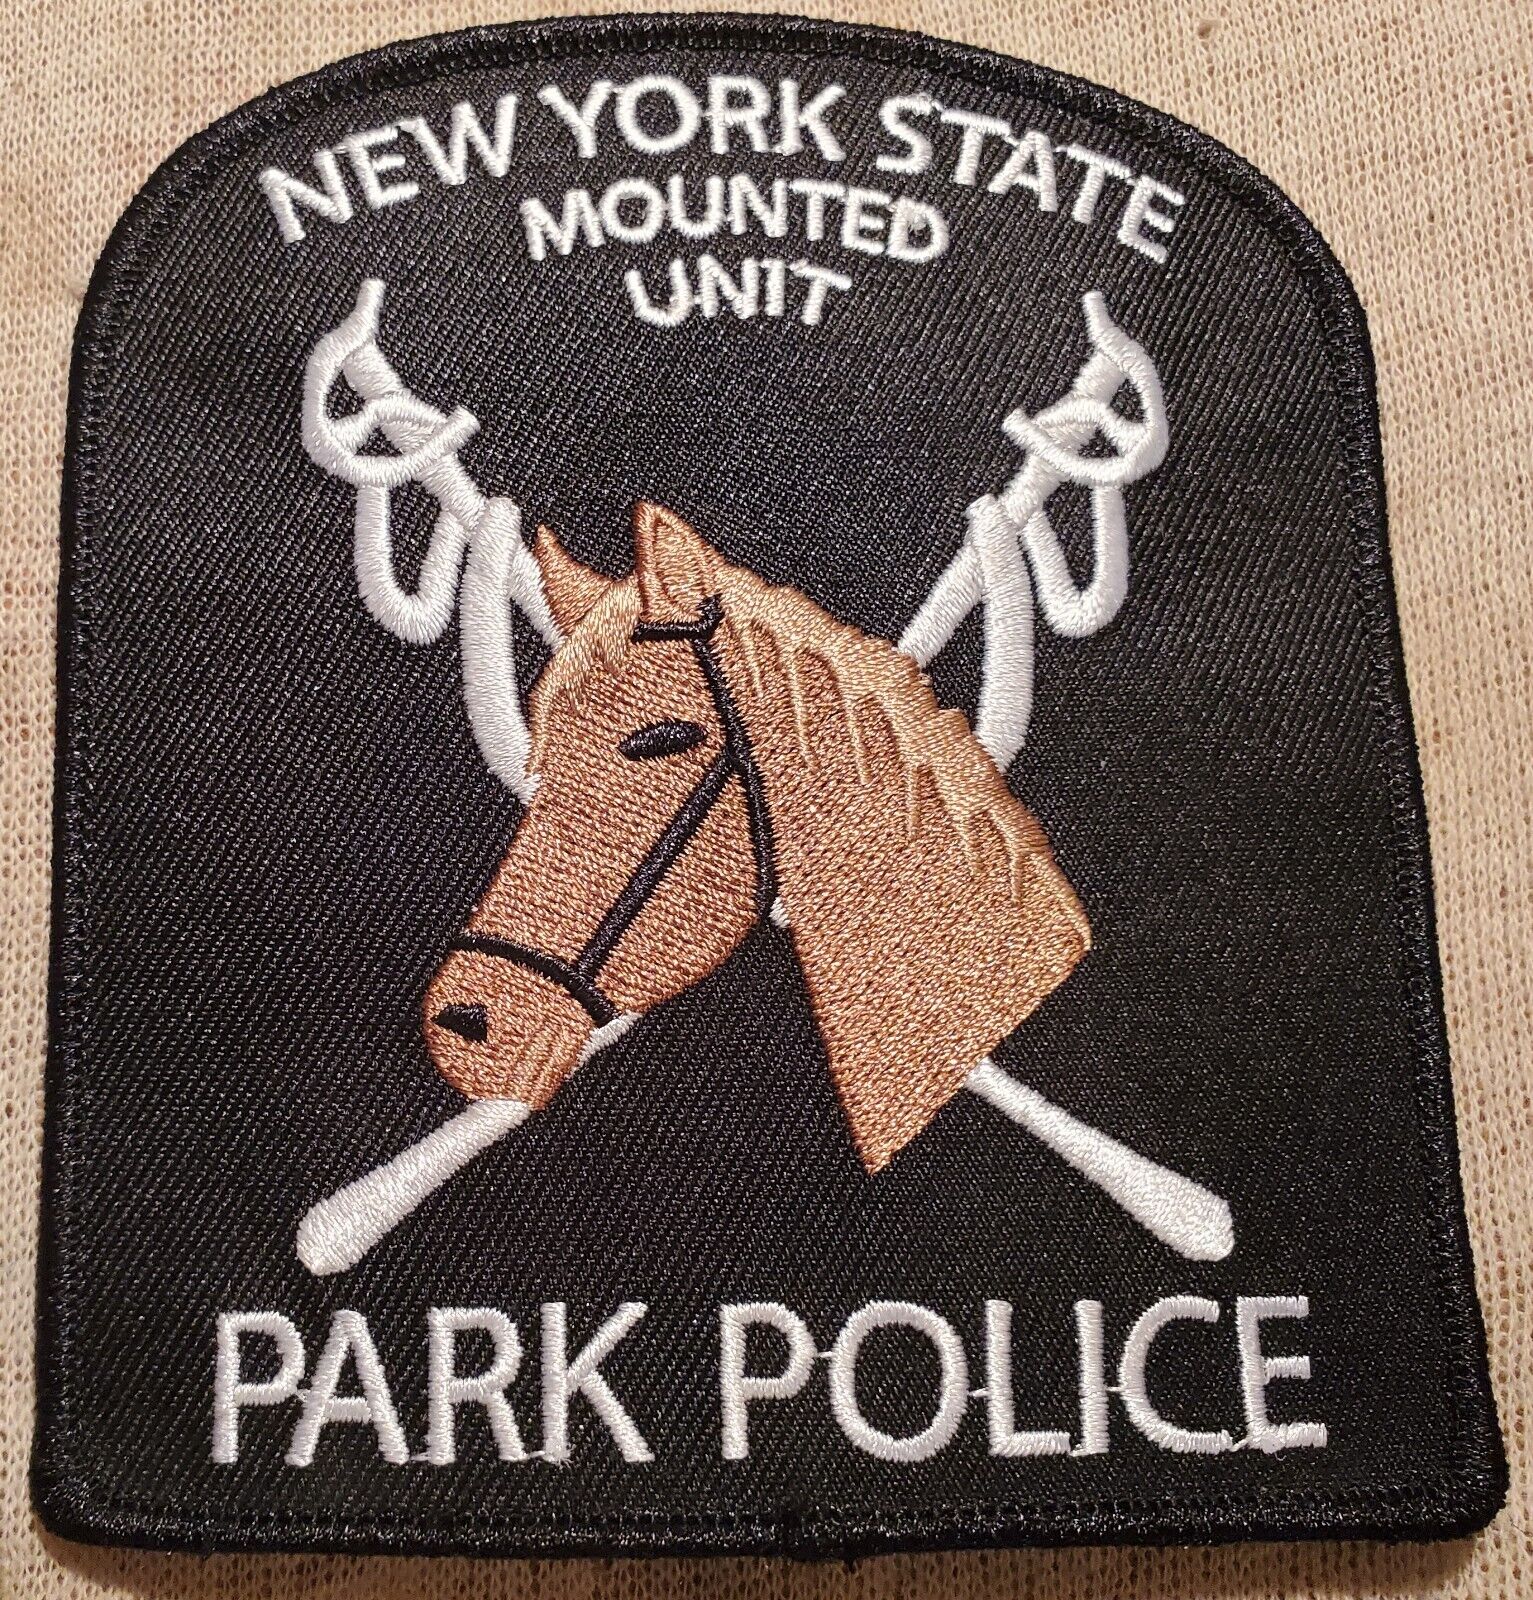 NY New York State Park Police Mounted Unit Shoulder Patch